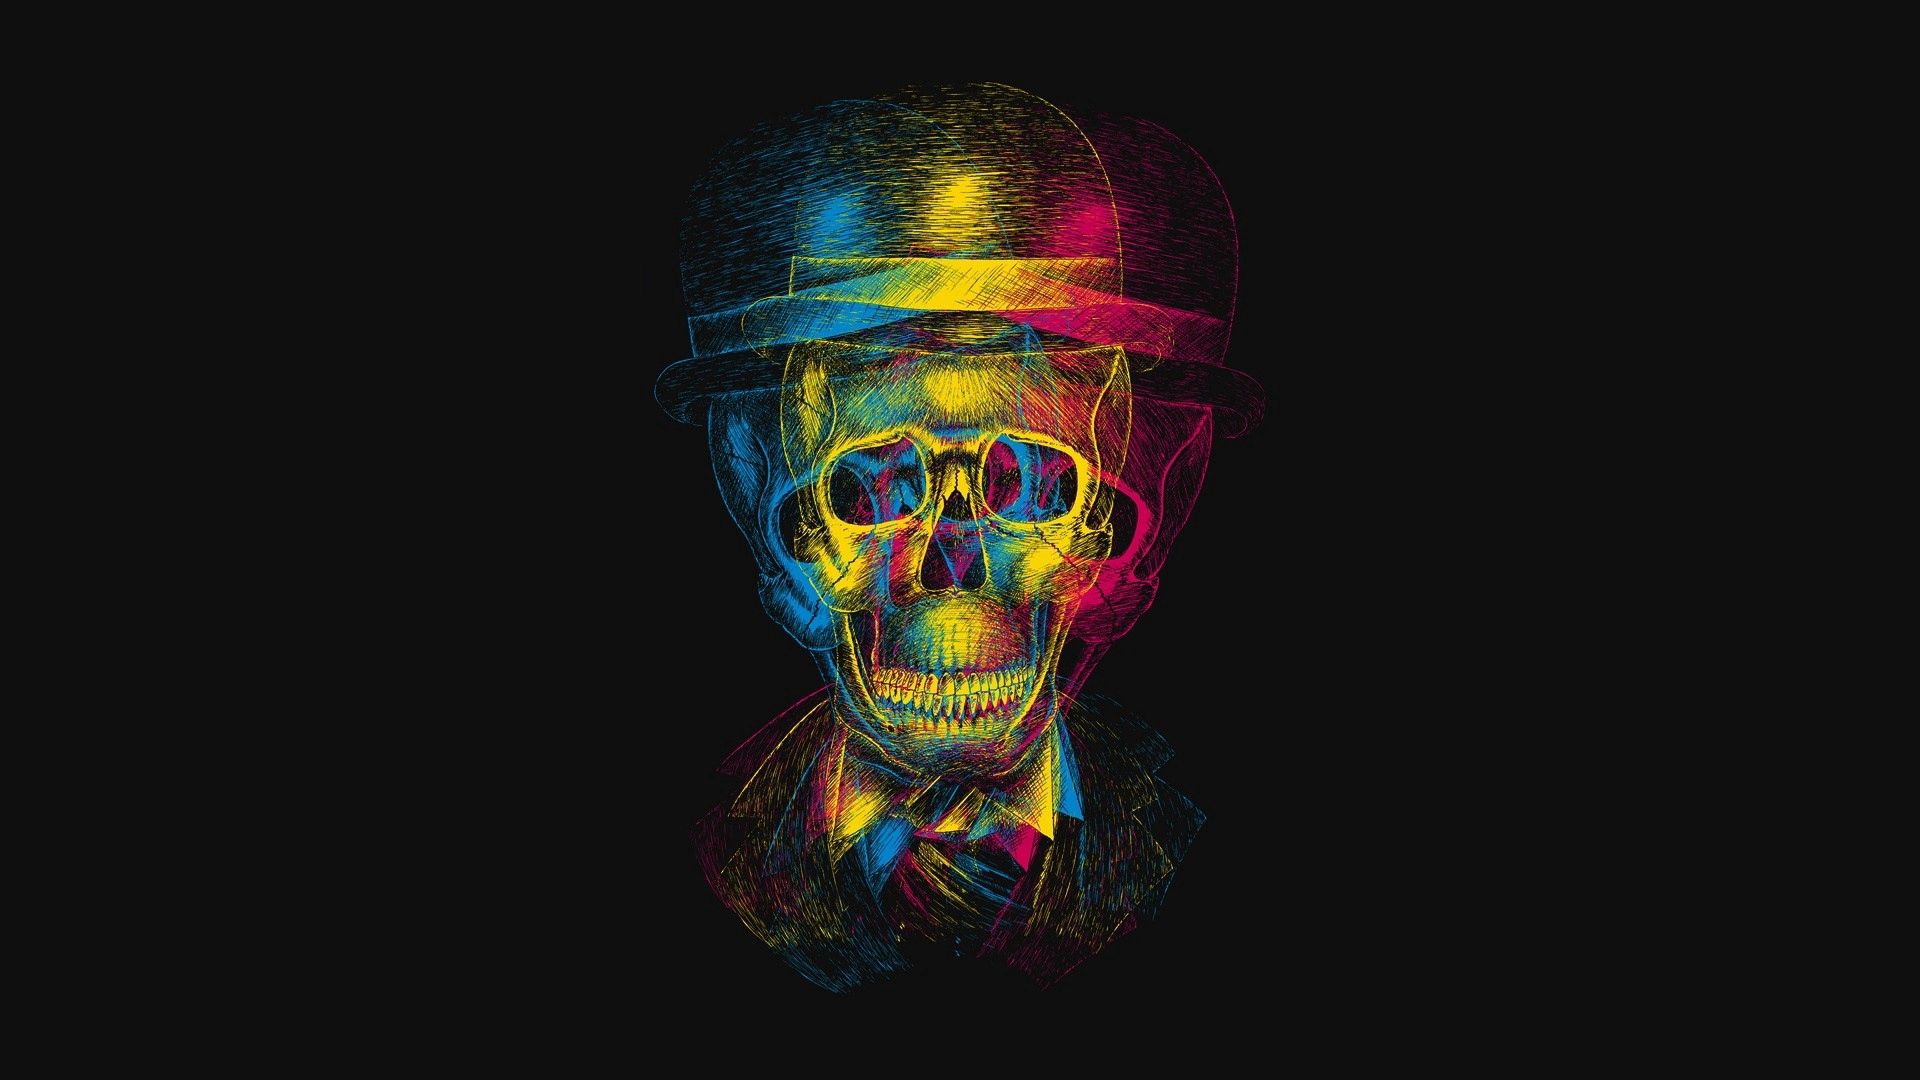 156404 download wallpaper 3d, skull, picture, drawing, hat, anaglyph screensavers and pictures for free